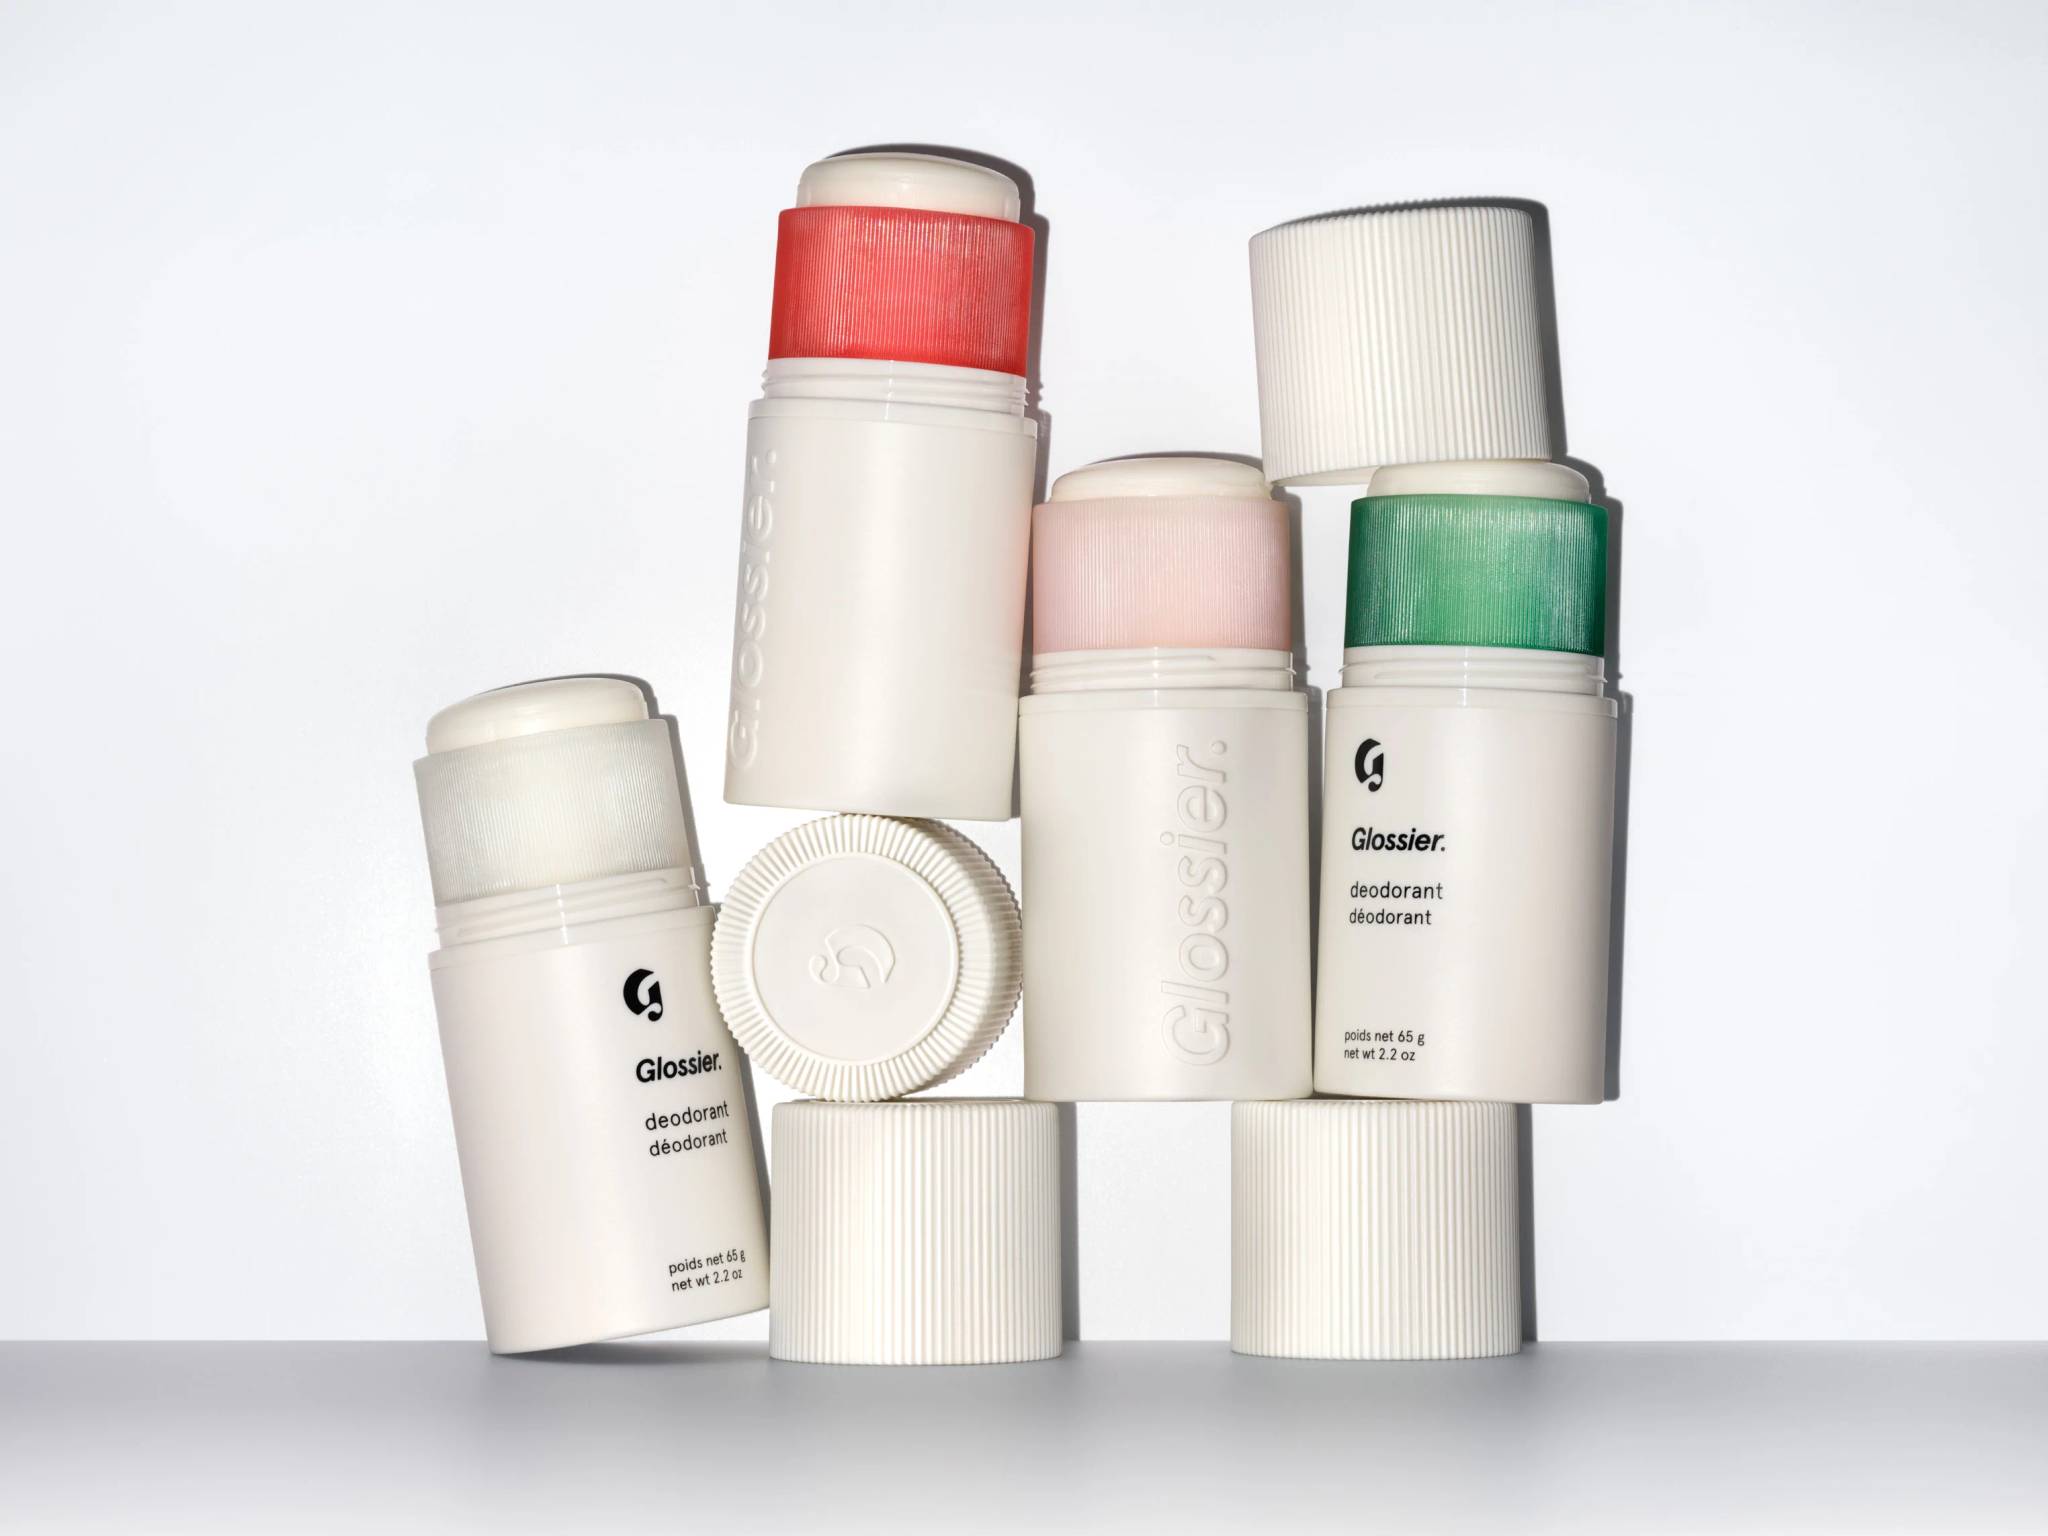 Glossier renews sustainable focus with natural deodorant